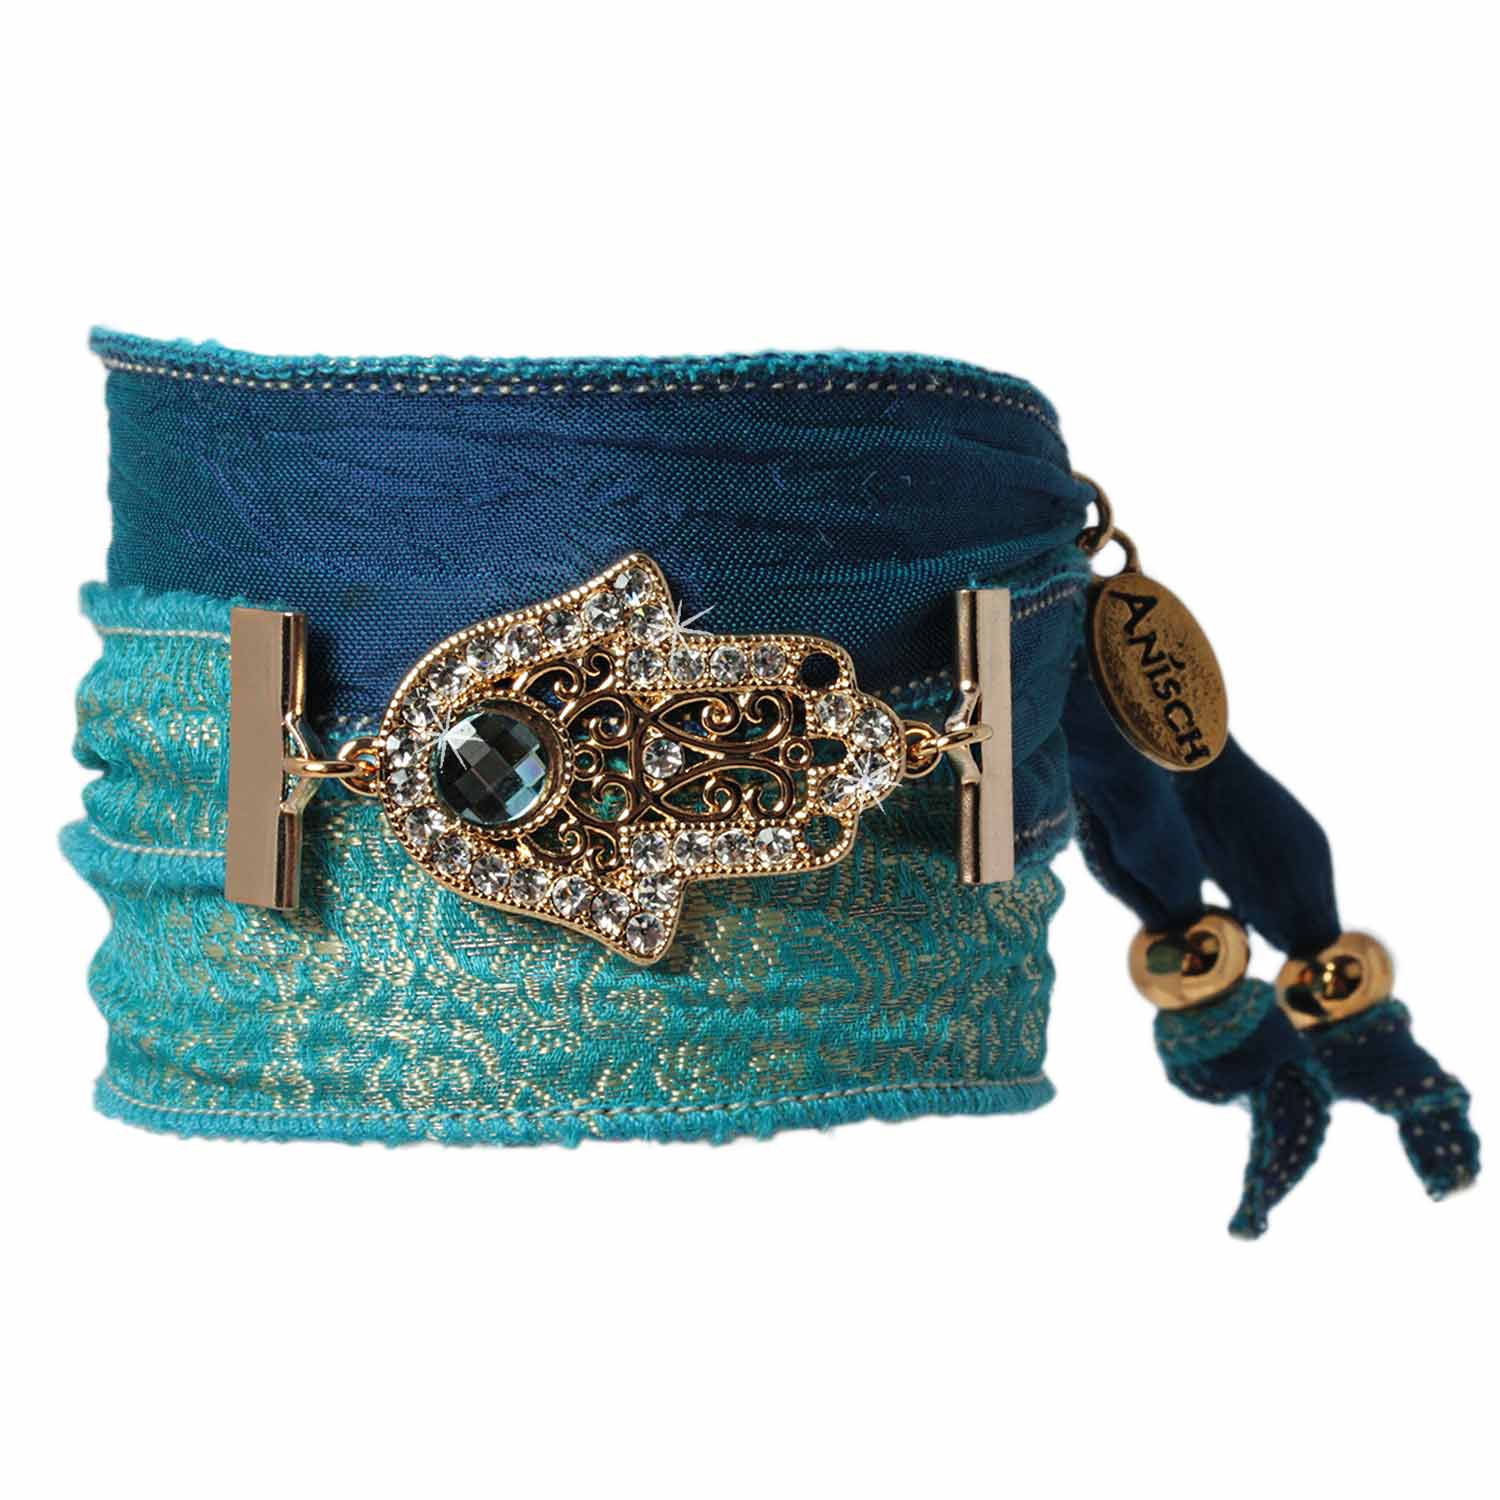 Blue Turquise - Hand of Fatima bracelet from Indian saris